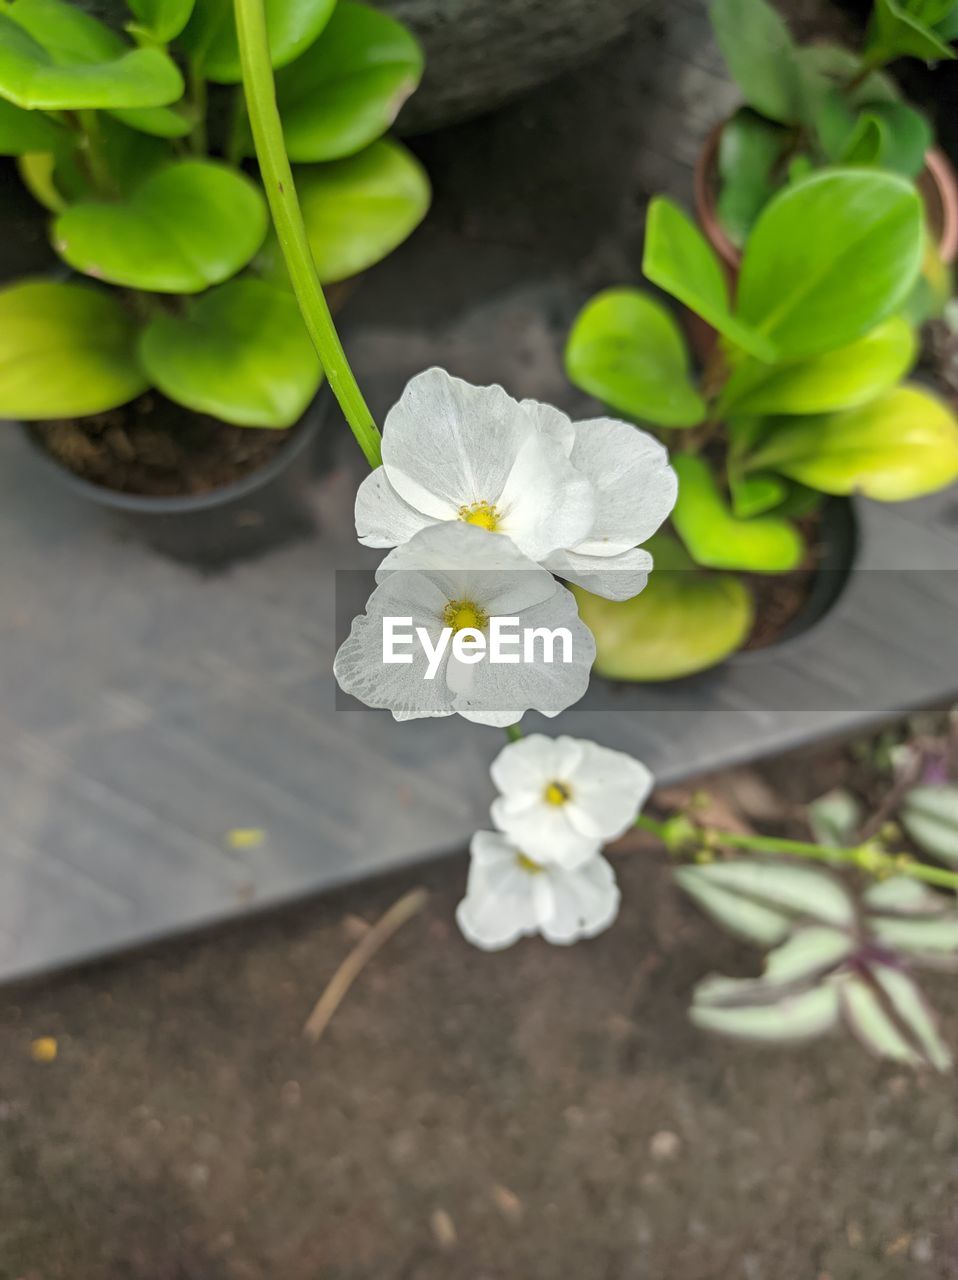 plant, flower, flowering plant, yellow, freshness, green, beauty in nature, nature, growth, plant part, leaf, fragility, high angle view, close-up, no people, flower head, springtime, petal, inflorescence, outdoors, day, blossom, botany, white, focus on foreground